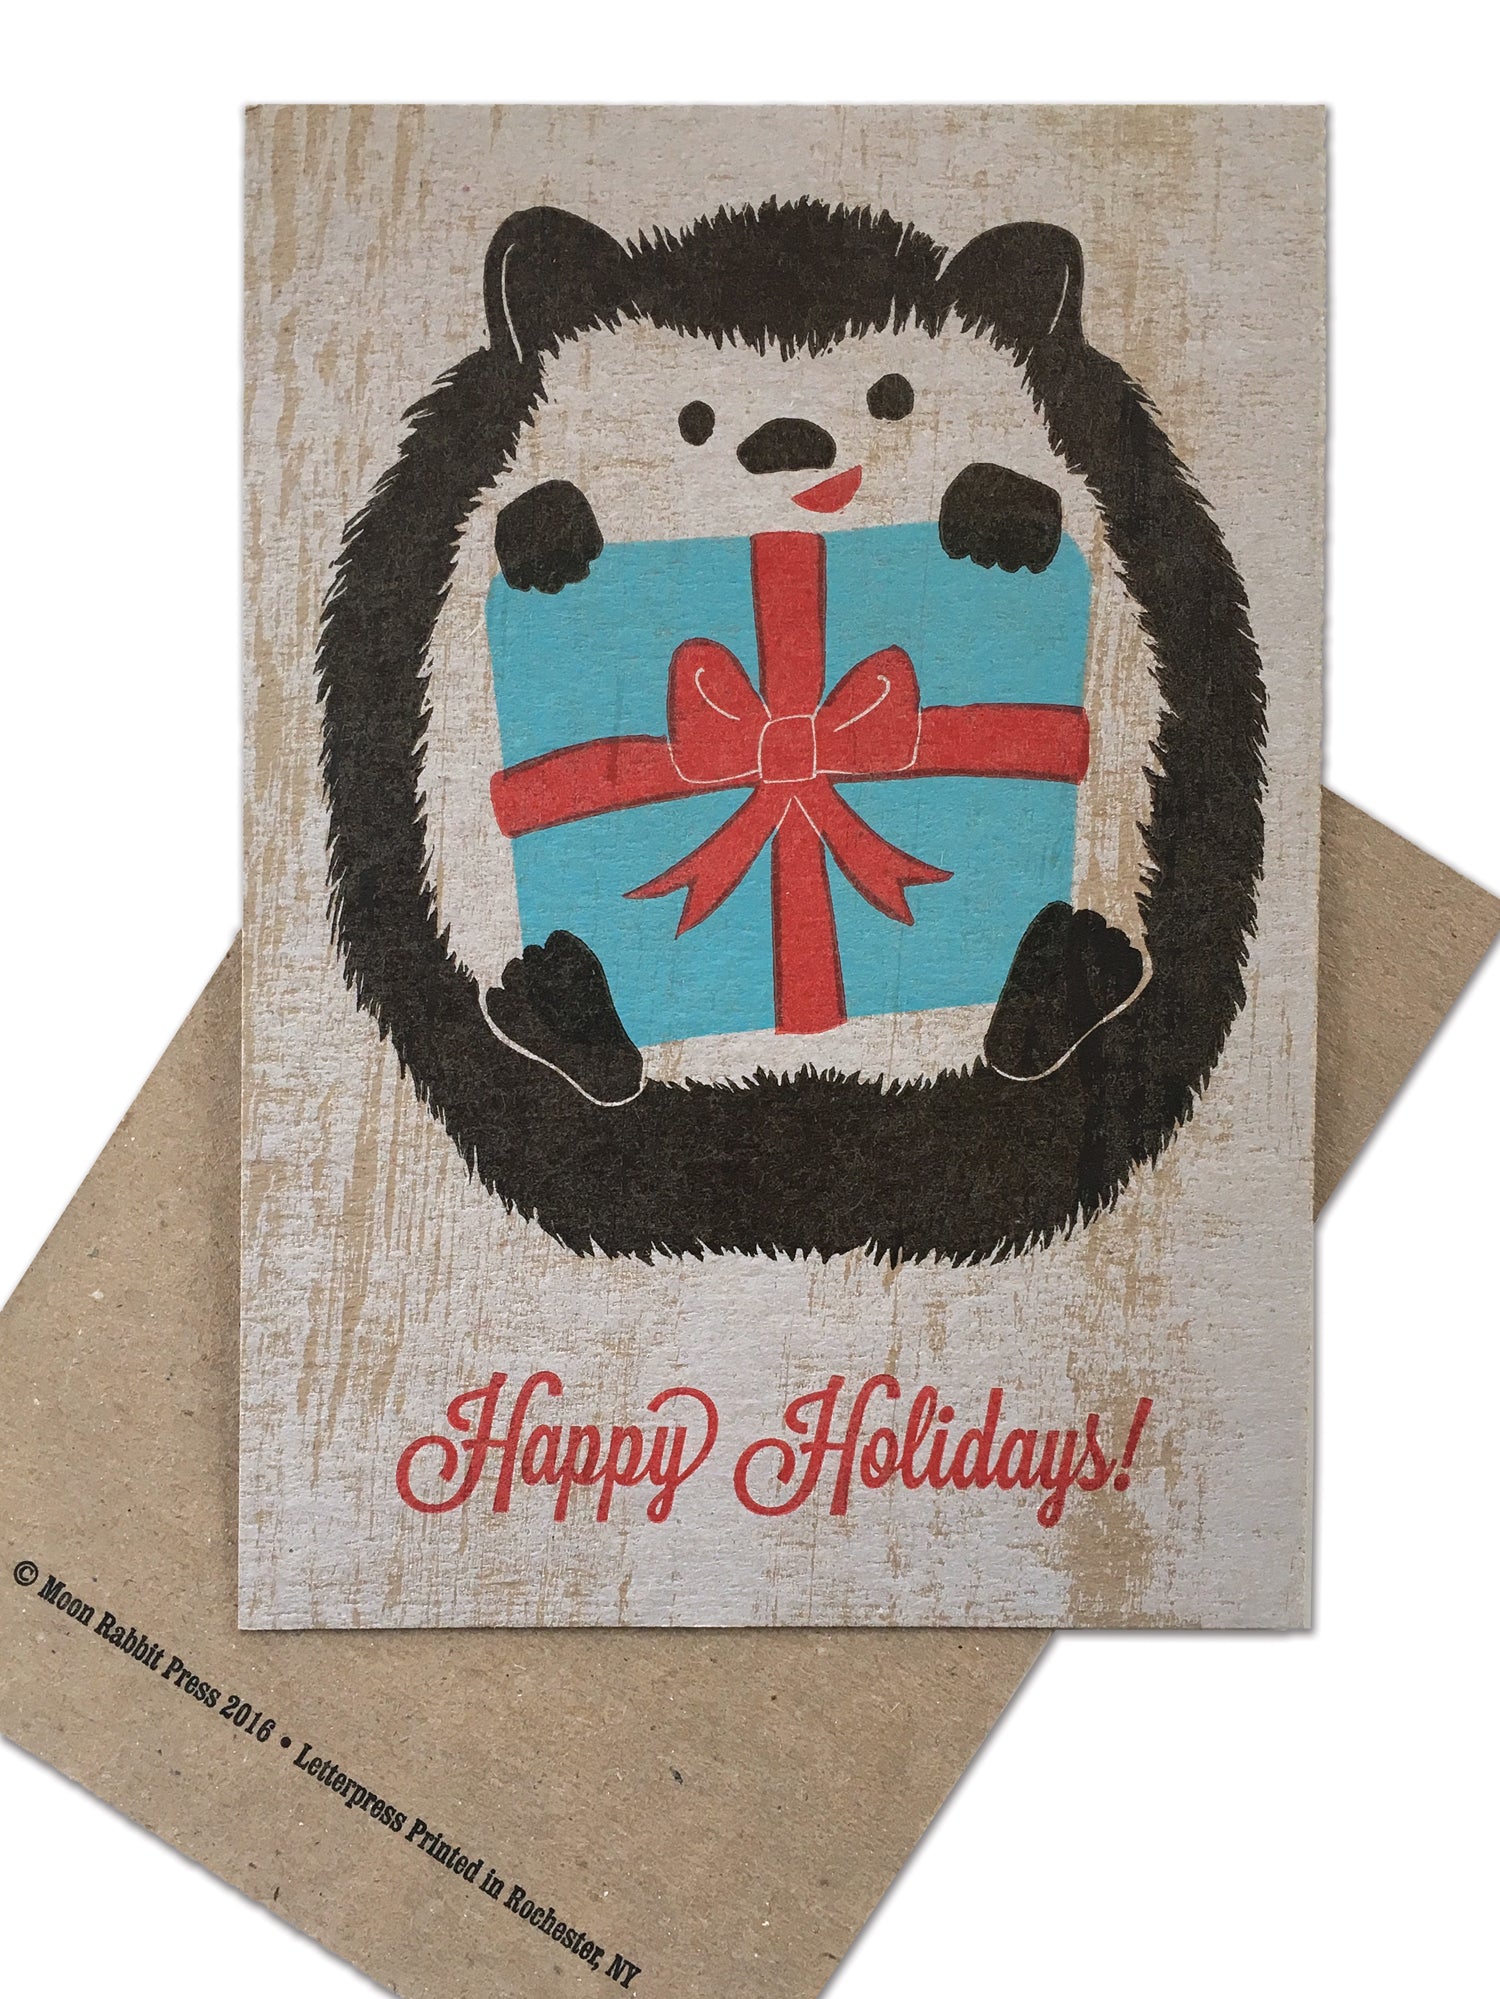 hedgie hedgehog letterpress holiday card printed in Rochester NY